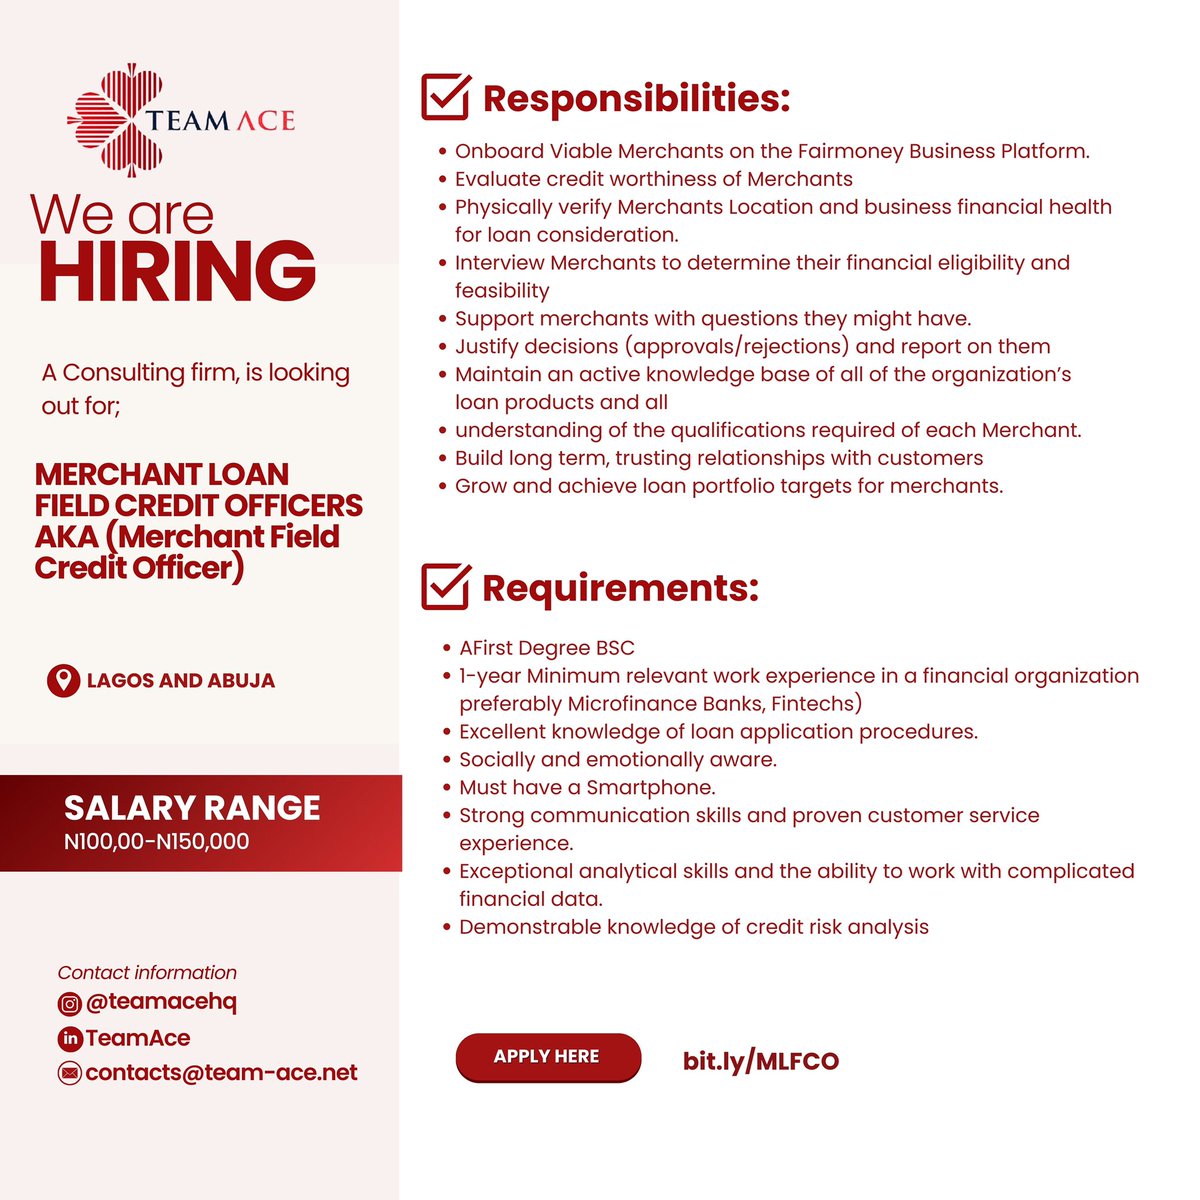 Job Opening!
See flyer for details. 

Qualified and interested? 

Apply here 👇🏽
bit.ly/MLFCO

#Arsenal #Binance #jobopenings #jobopportunities #hiringnow #jobsinabuja #jobsinlagos #teamace